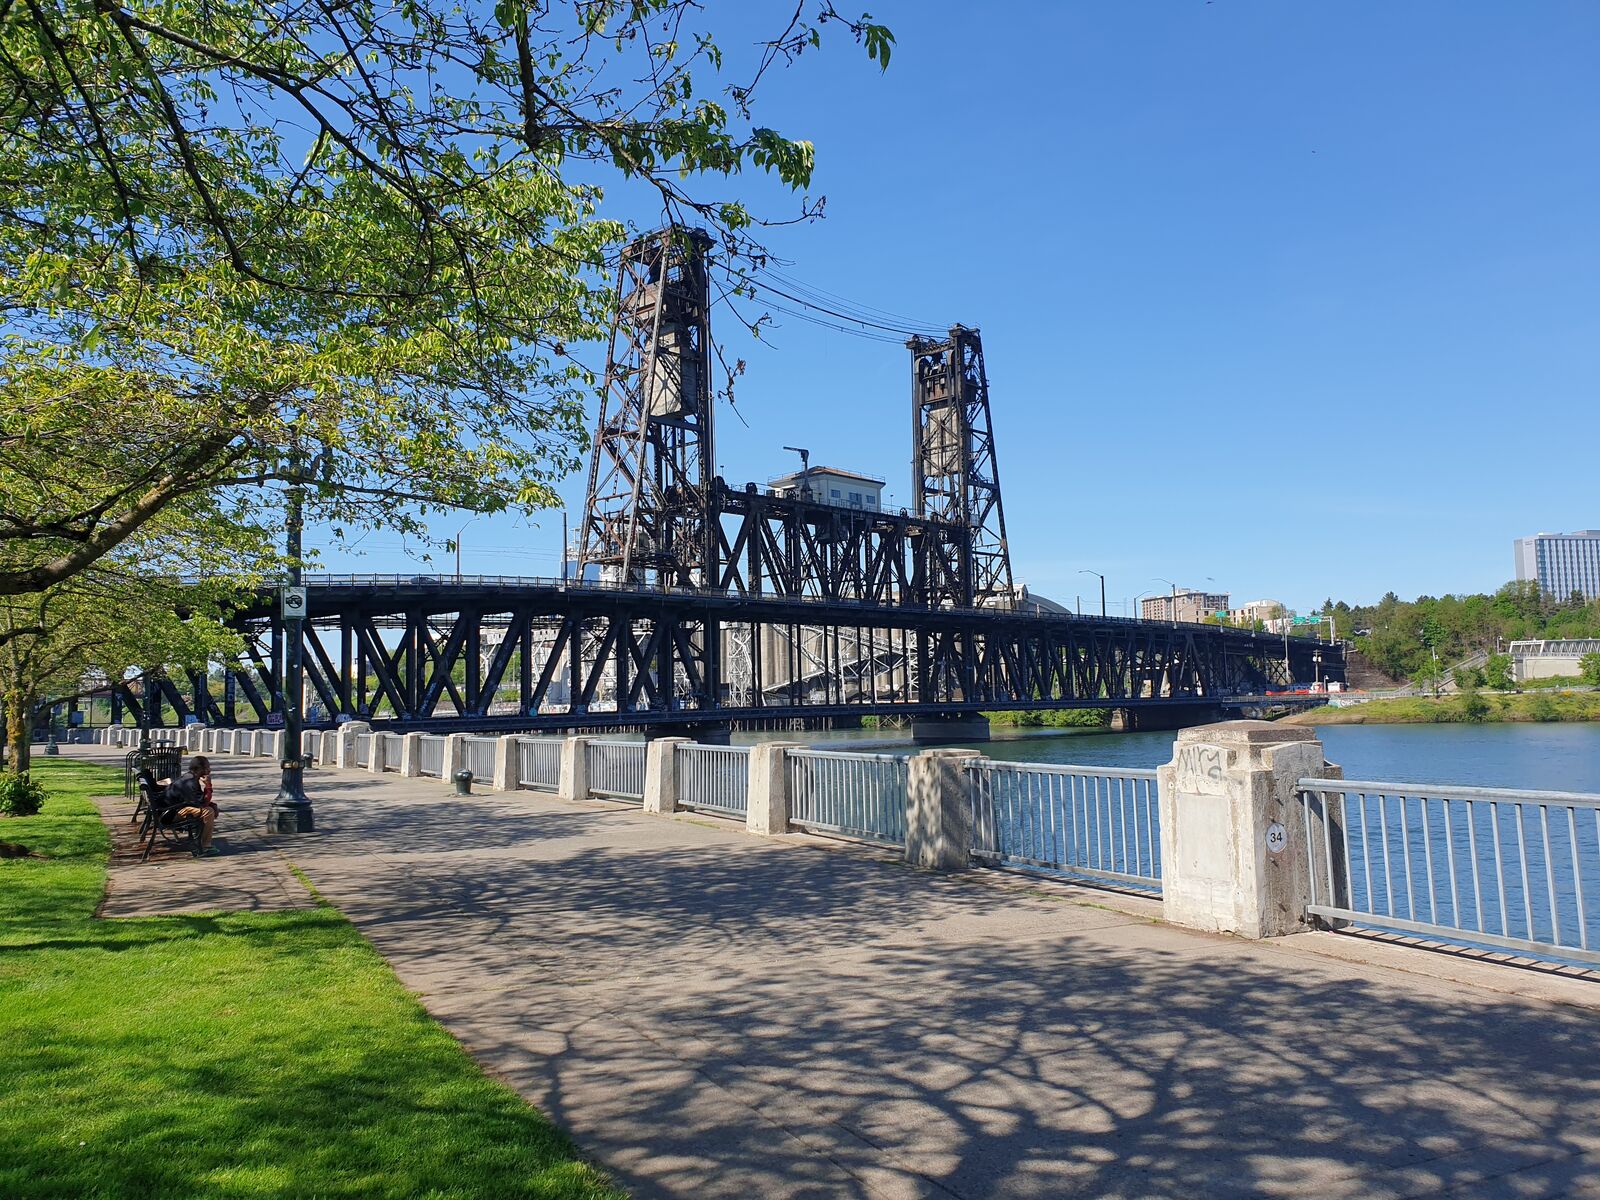 Portland has bridges of many different styles on display: Steel Bridge in the city centre.